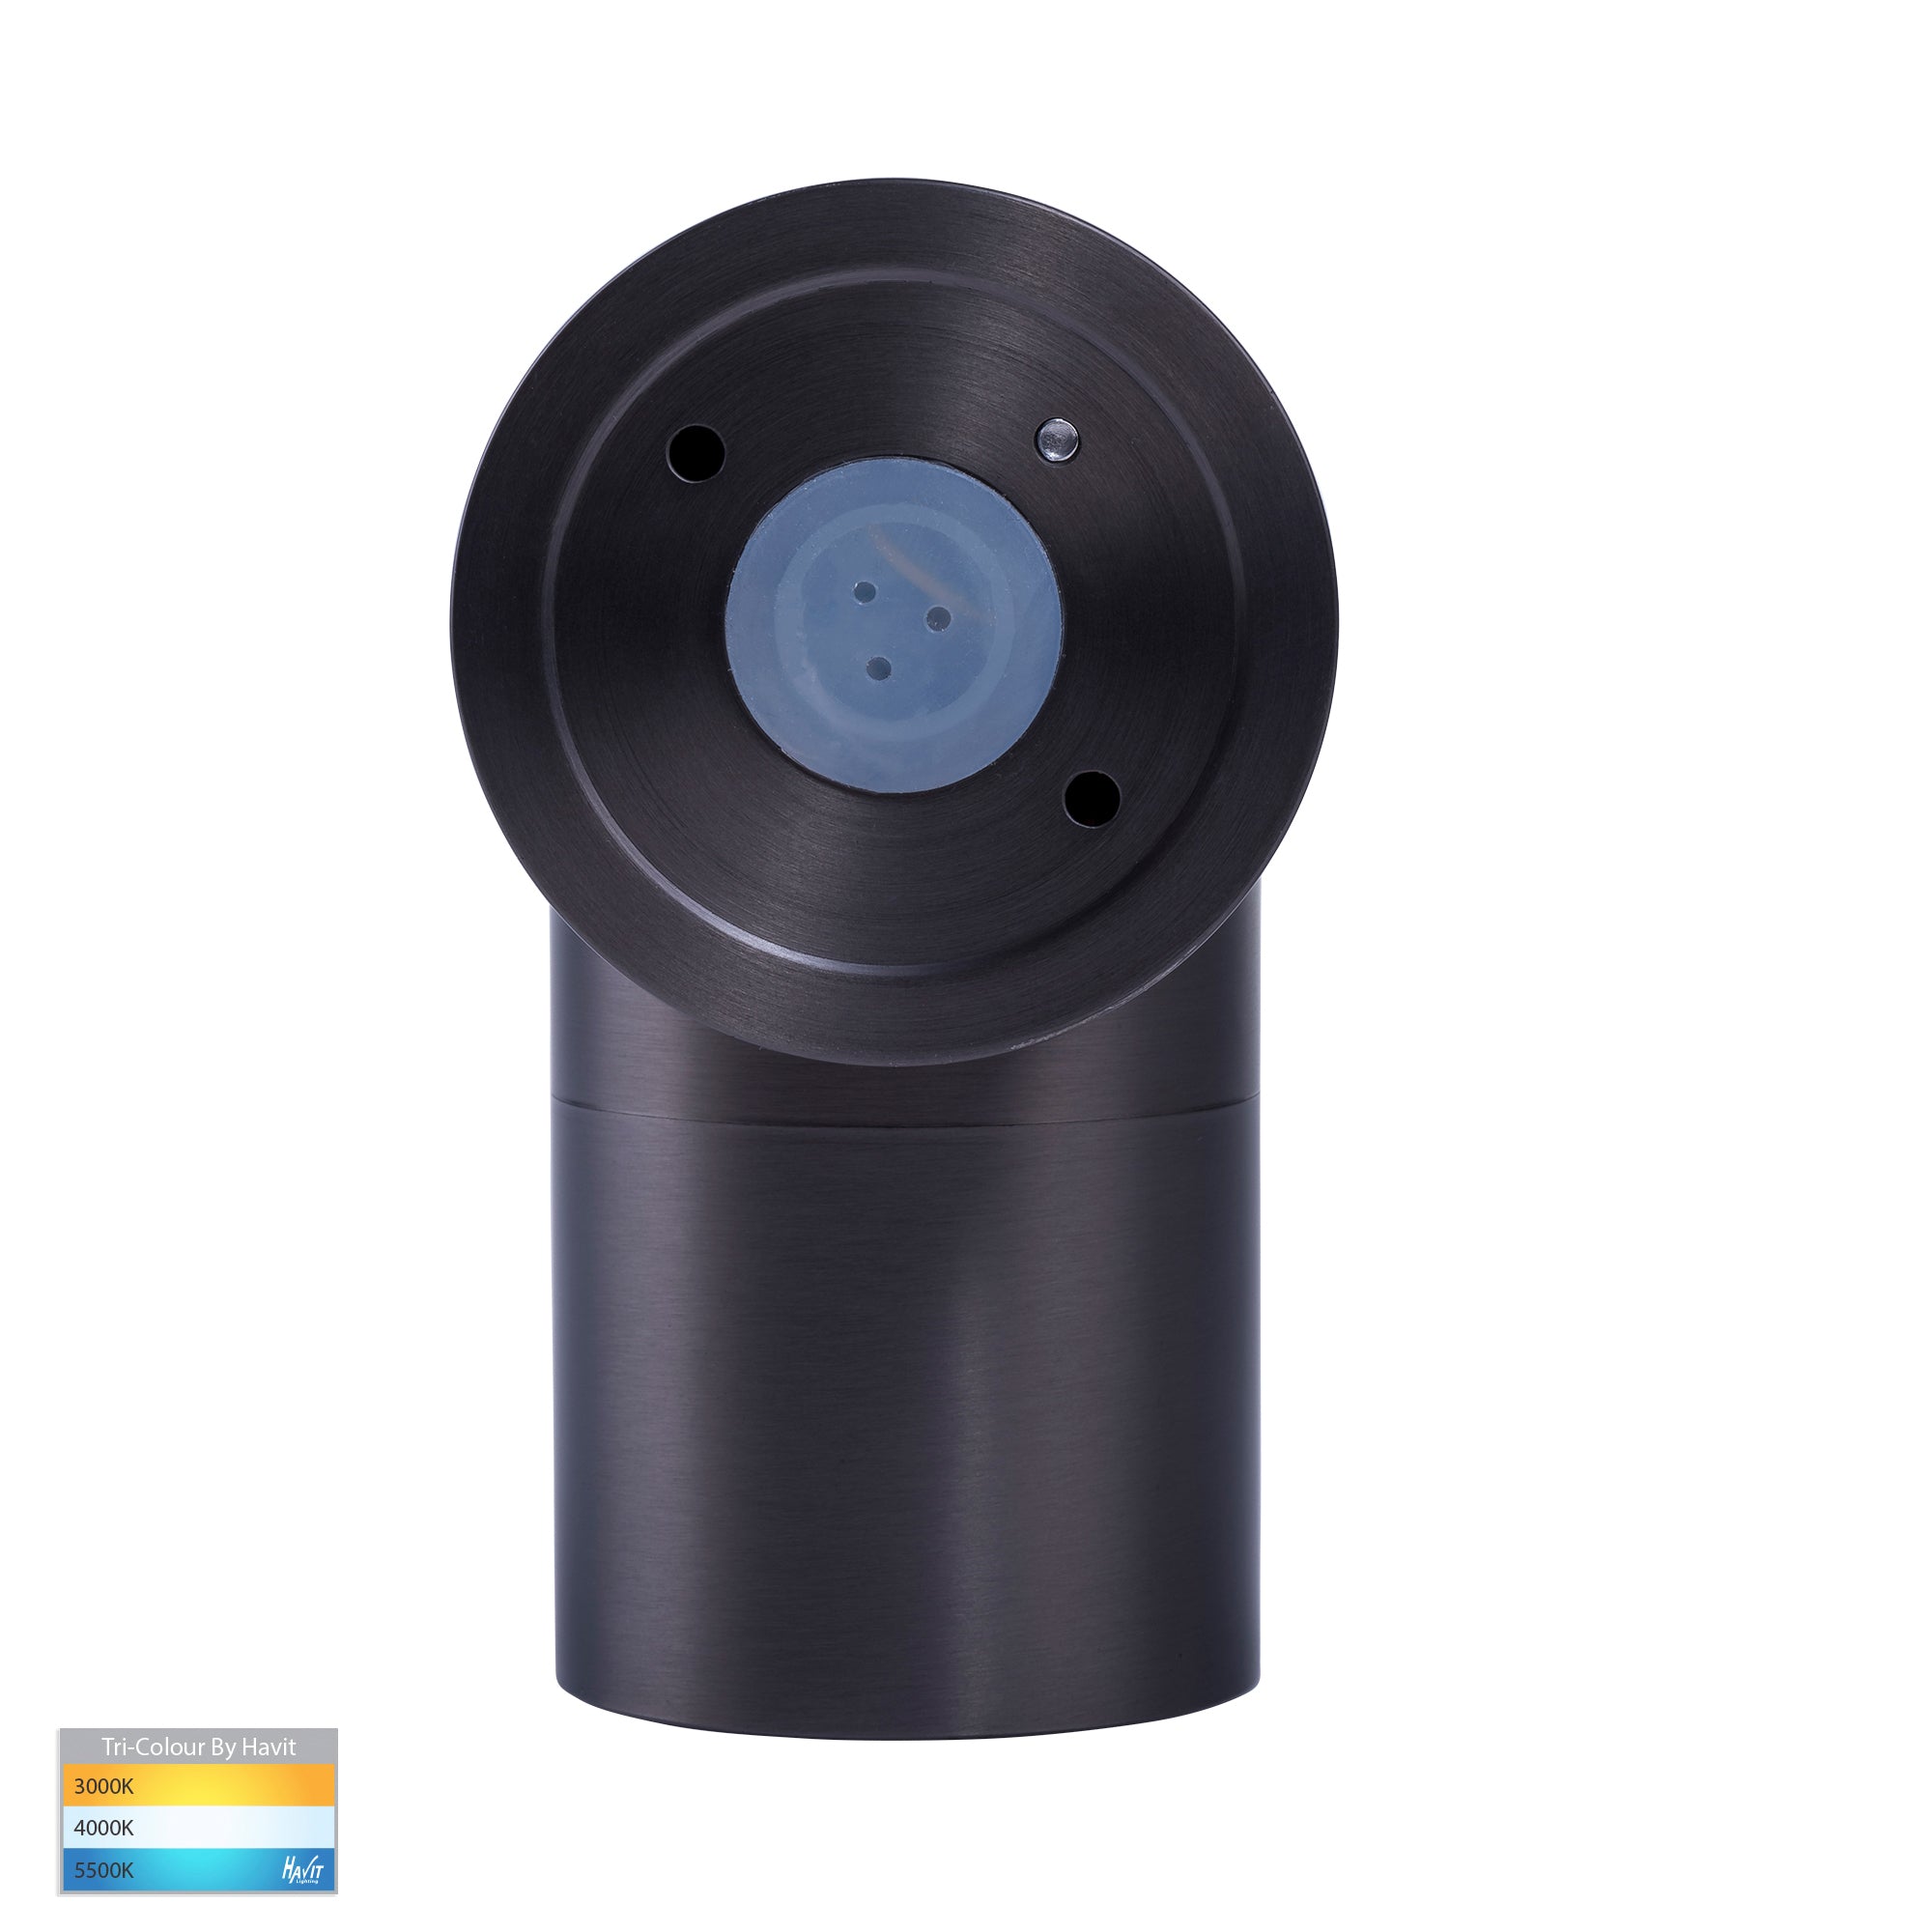 HV1175T-HV1177T - Tivah Solid Brass Graphite Coloured TRI Colour Fixed Down Wall Pillar Lights